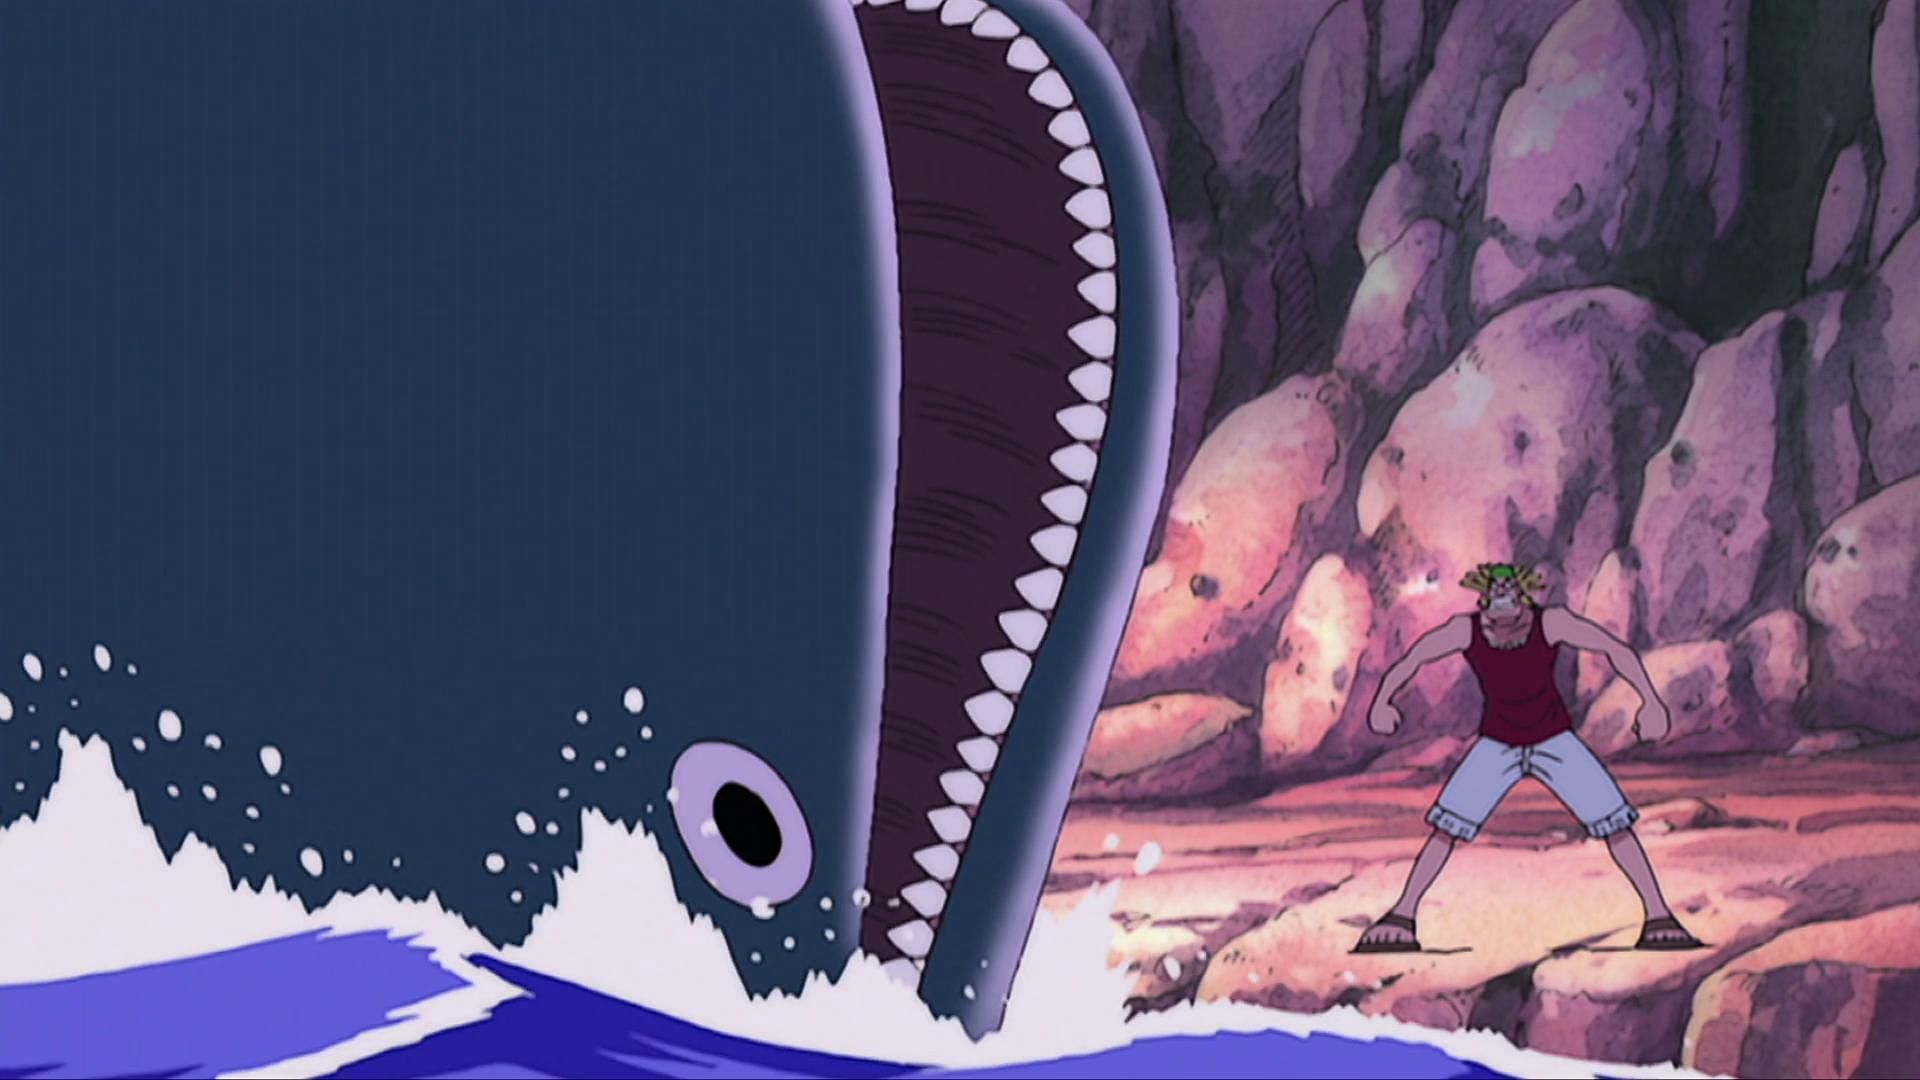 Laboon and Crocus as seen in the One Piece anime (Image via Toei Animation)